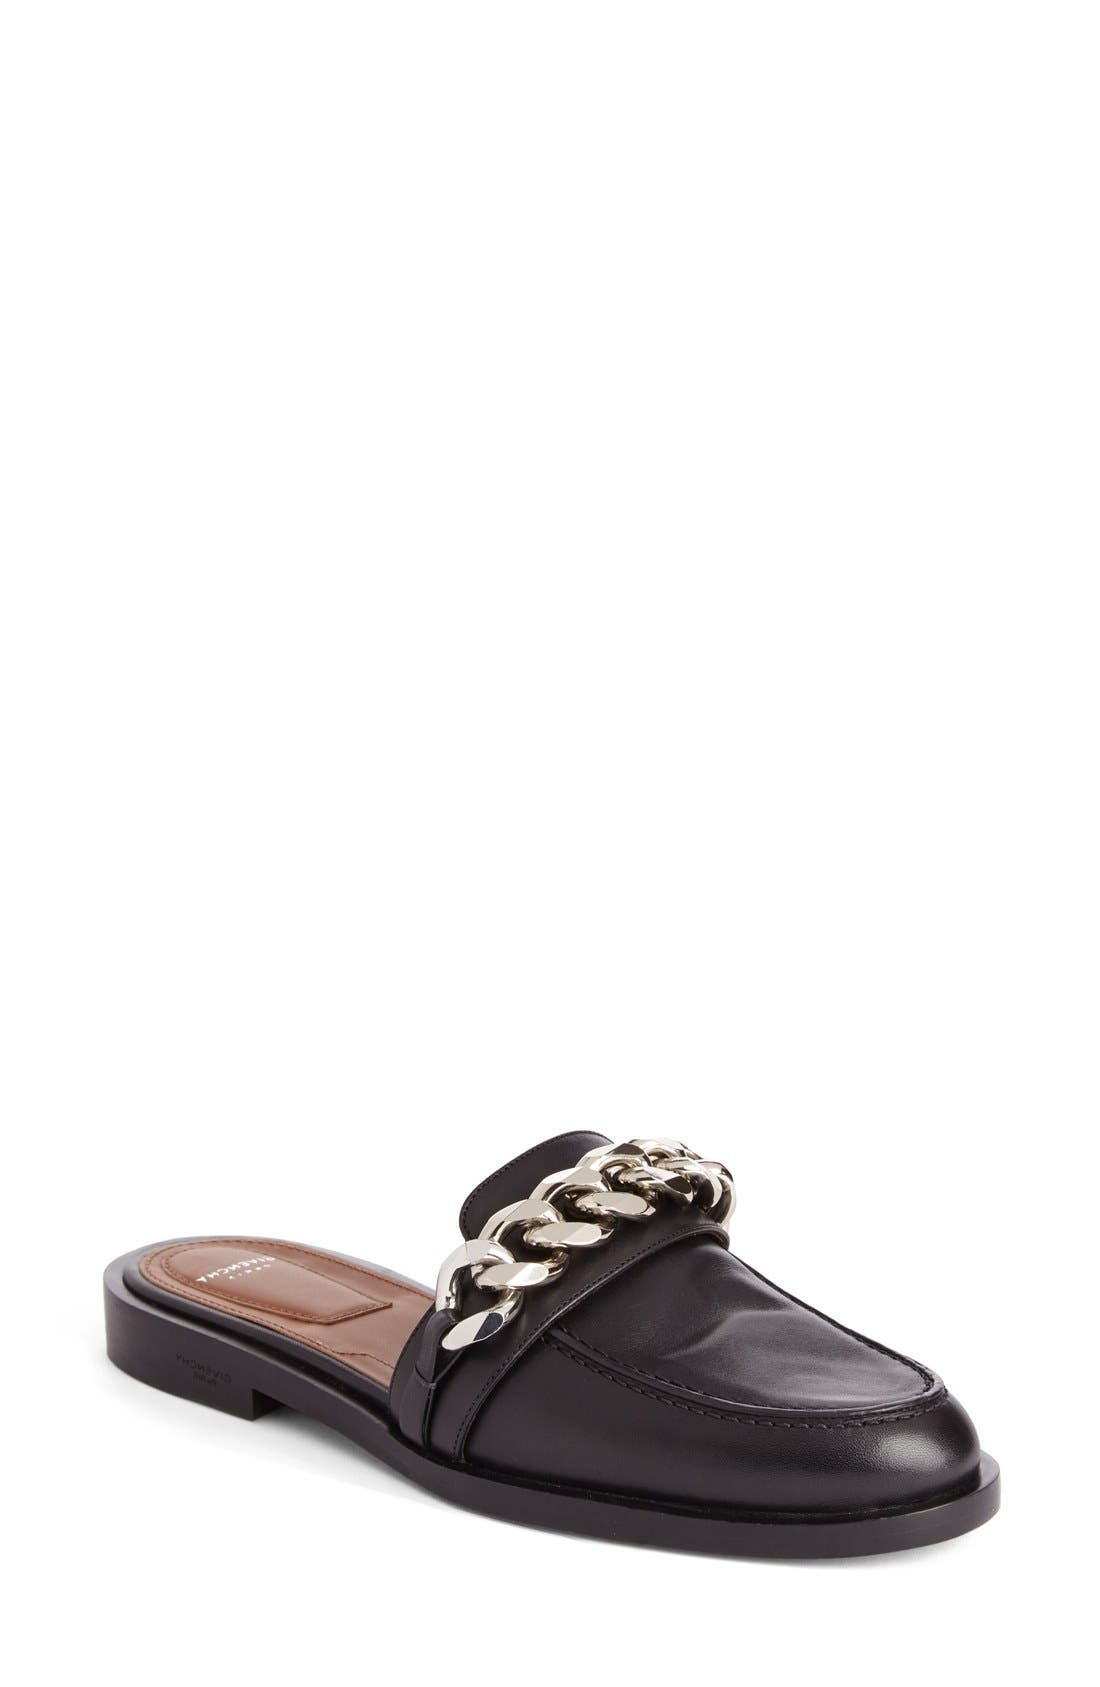 GIVENCHY CHAIN LEATHER LOAFER MULE, BLACK | ModeSens